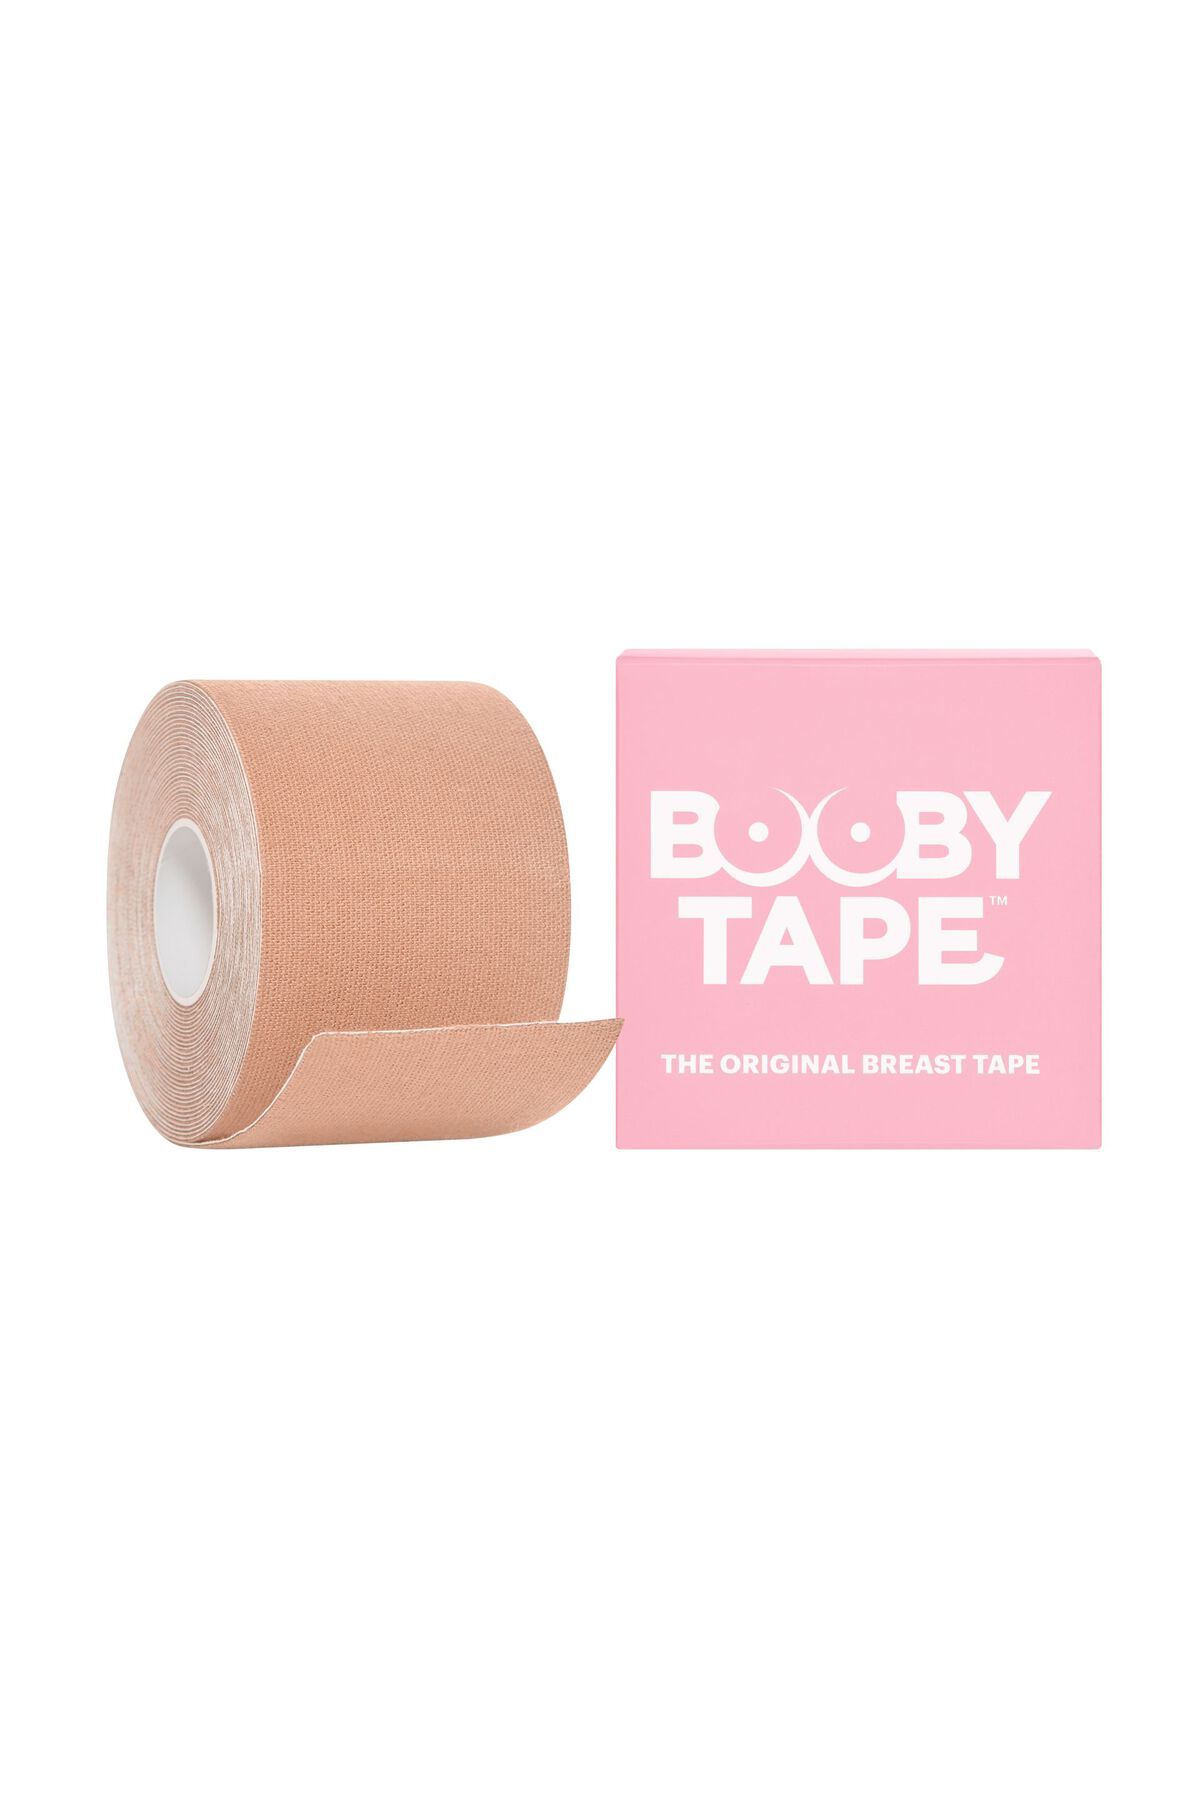 Breast Tape Reviews Tape For Large Breasts Tape, High Quality Breast Tape  Reviews Tape For Large Breasts Tape on